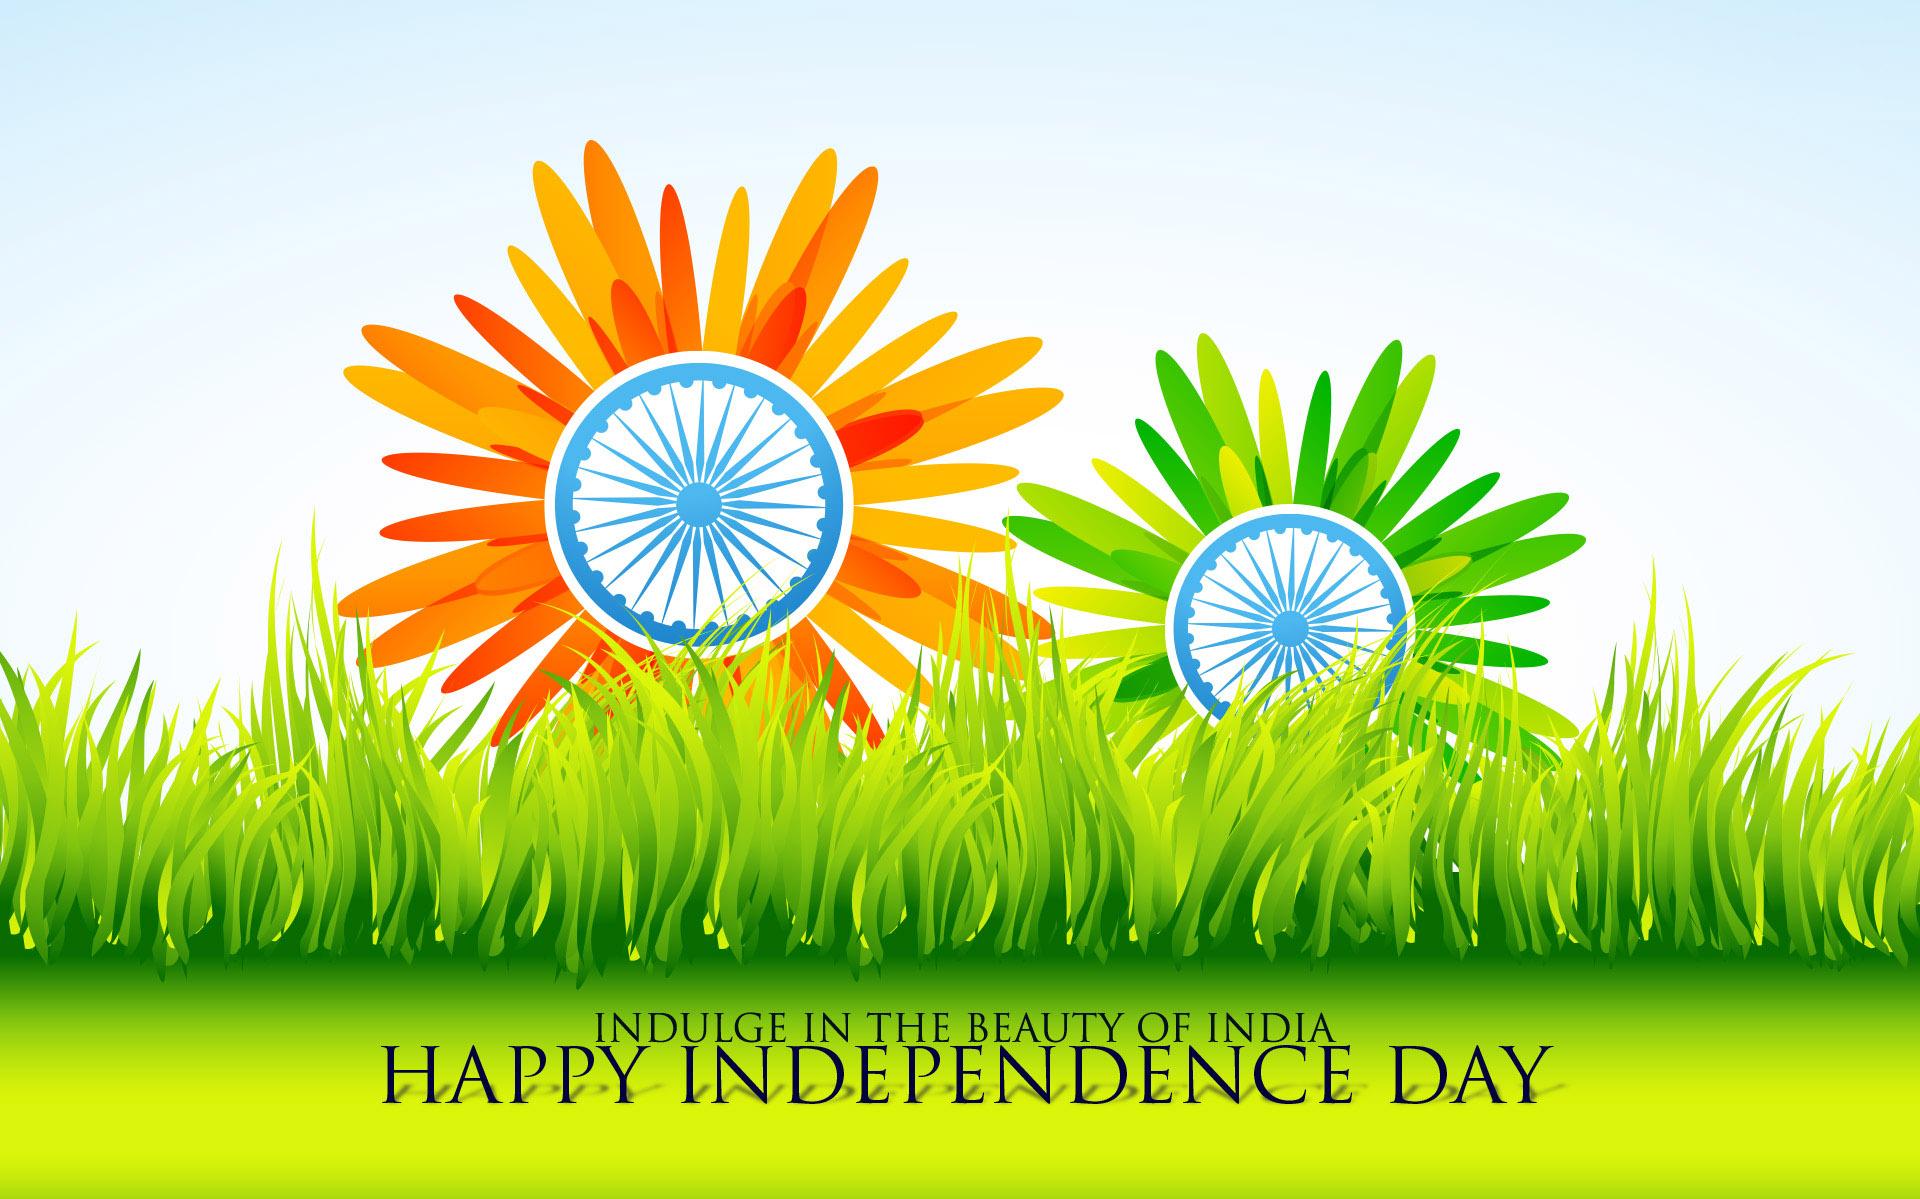 Free download Beautiful Indian Independence Day Wallpapers and